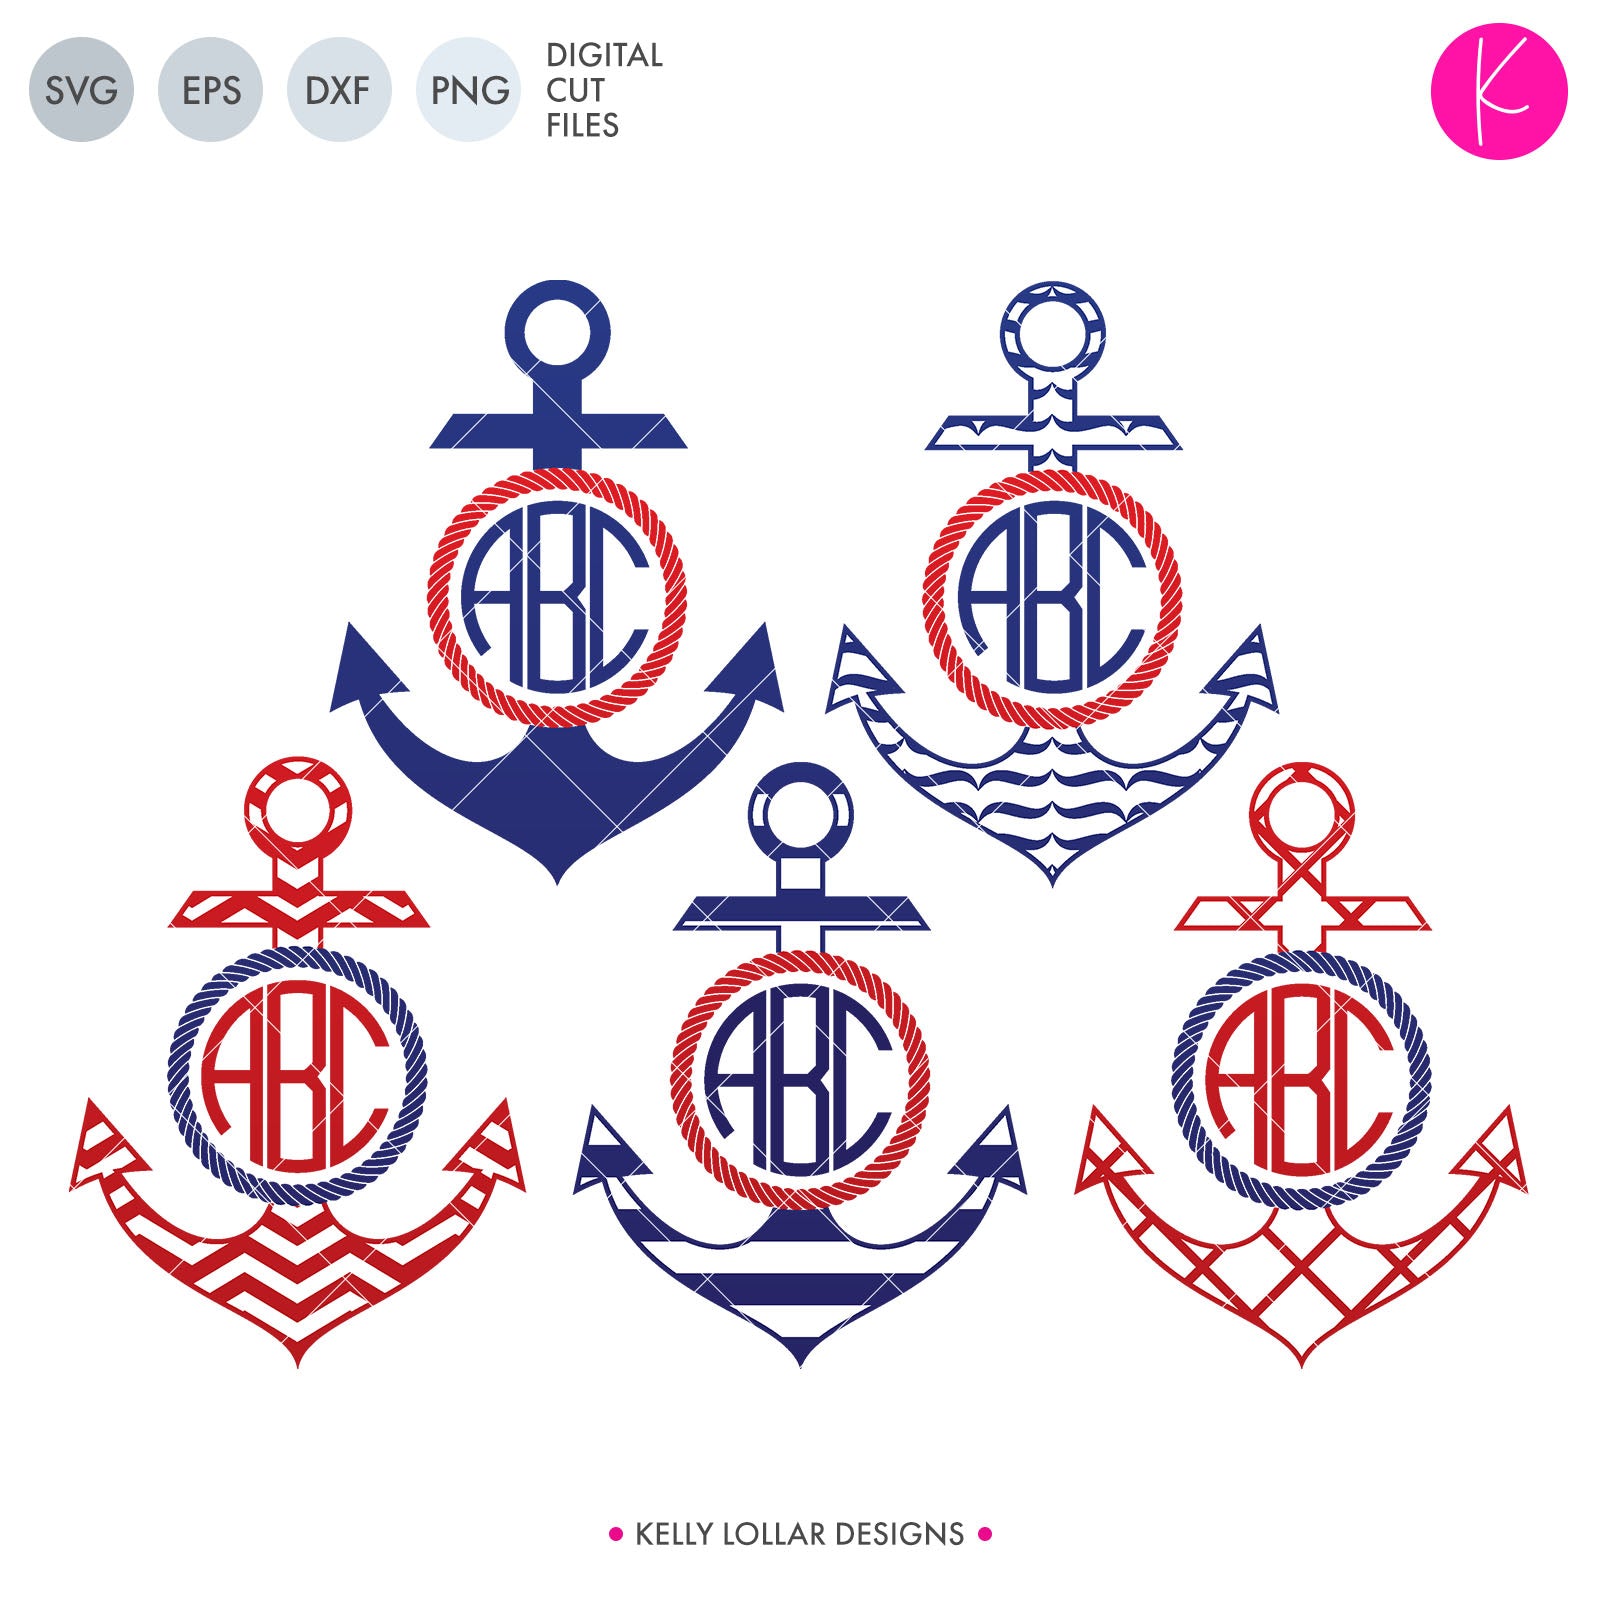 Download 4th Of July Summer Svg Dxf Eps Png Cut Files Kelly Lollar Designs Tagged Nautical